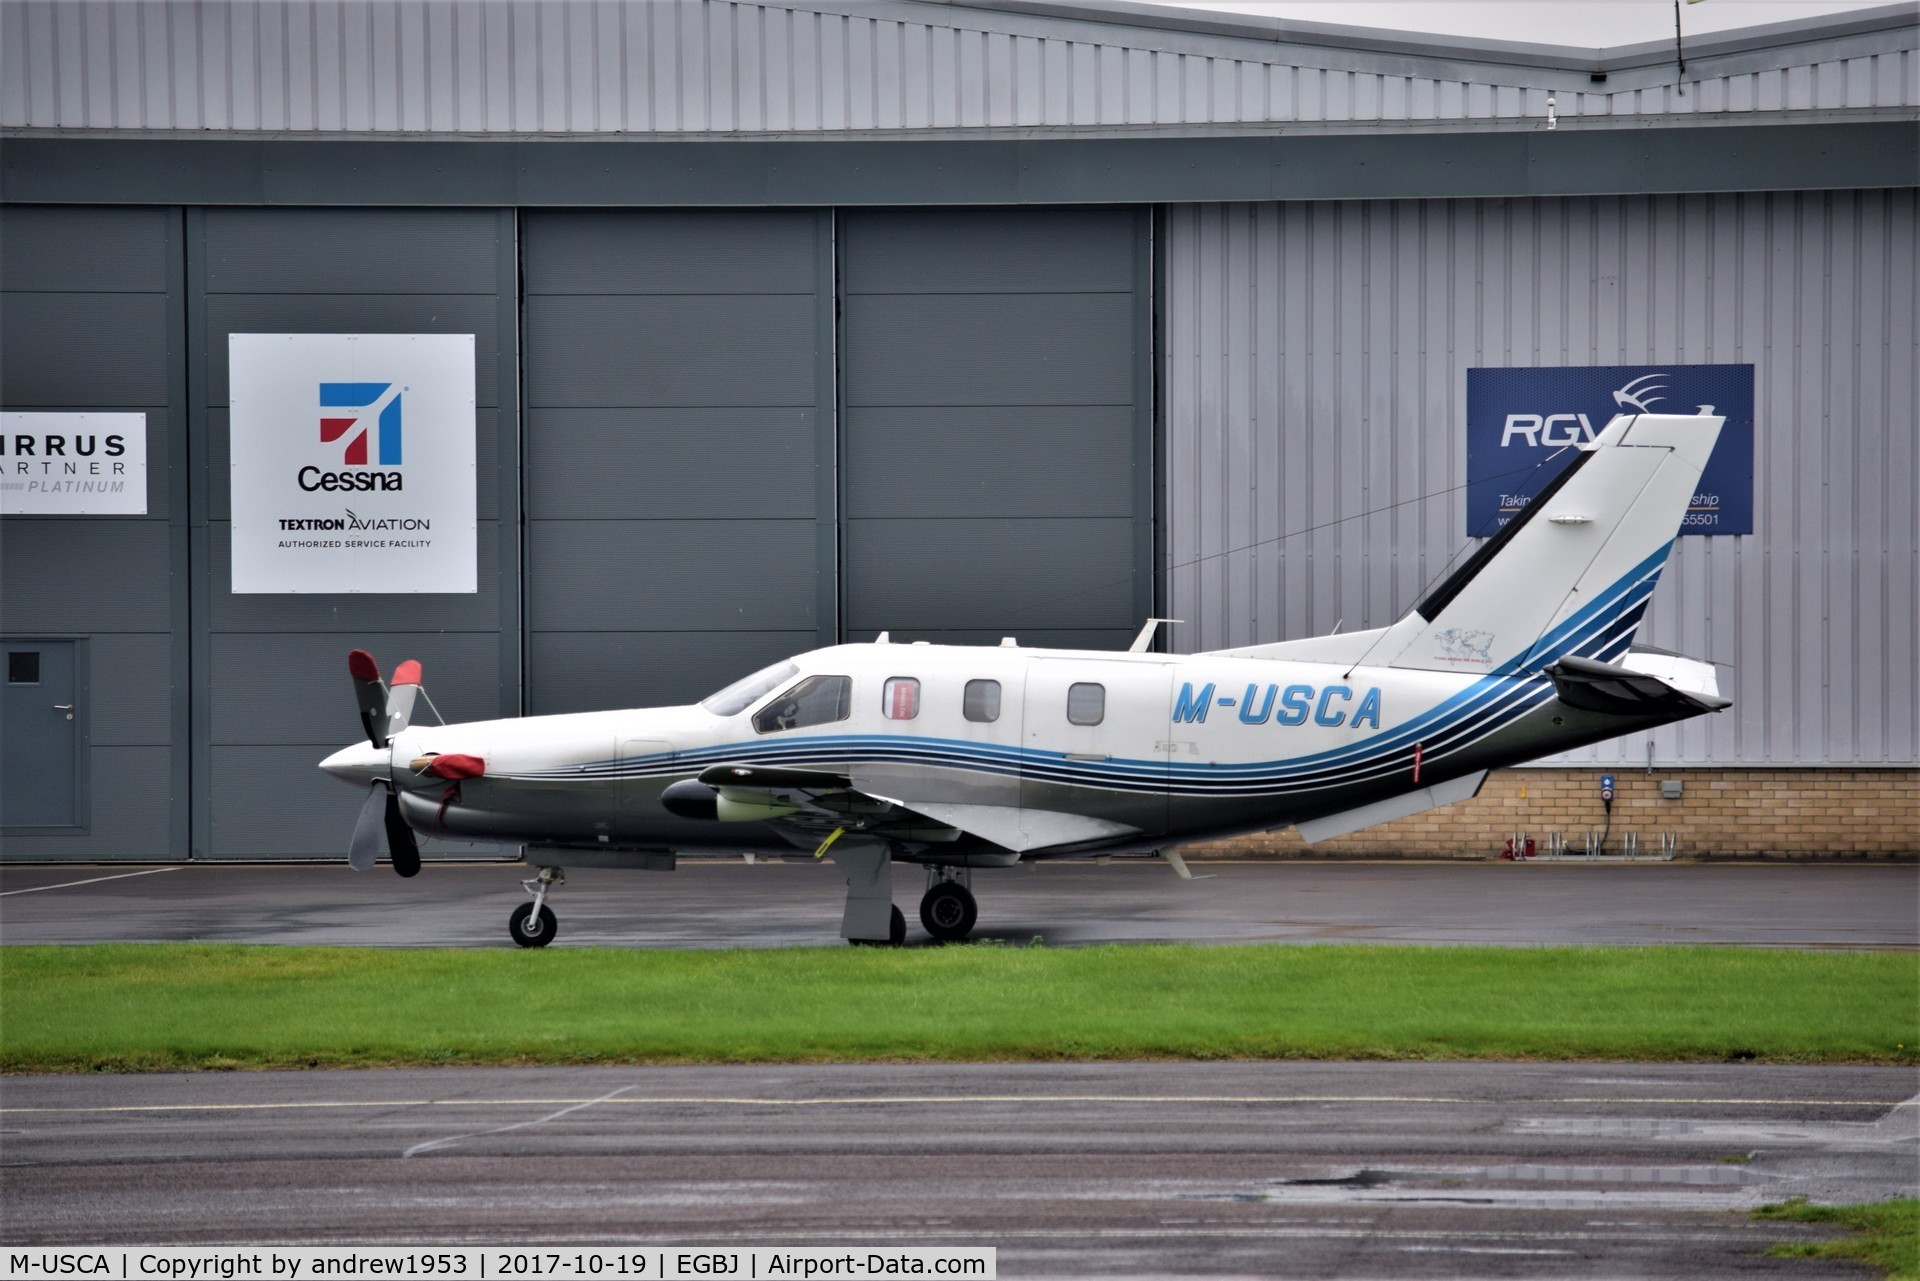 M-USCA, 2008 Socata TBM-700N C/N 456, M-USCA at Gloucestershire Airport.